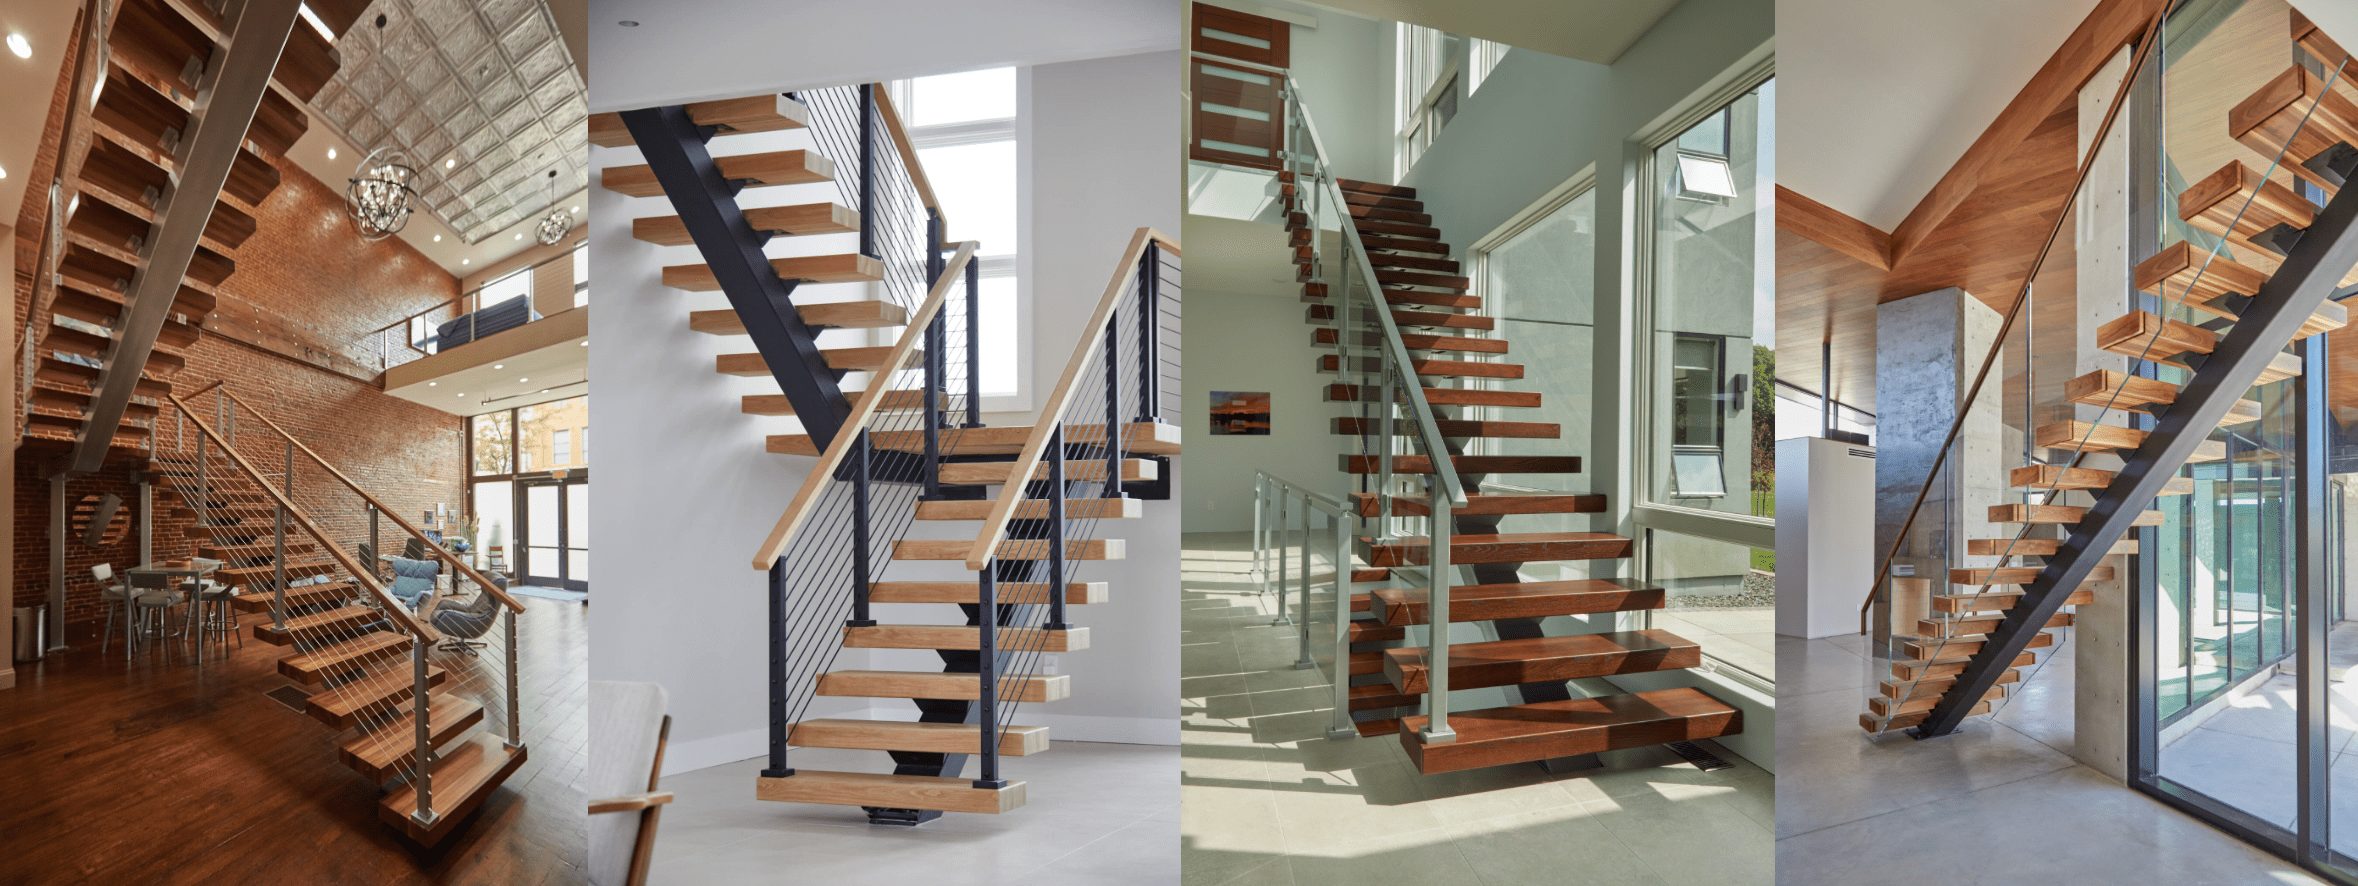 Metal Stairs with Wood Treads and Landings by viewrail